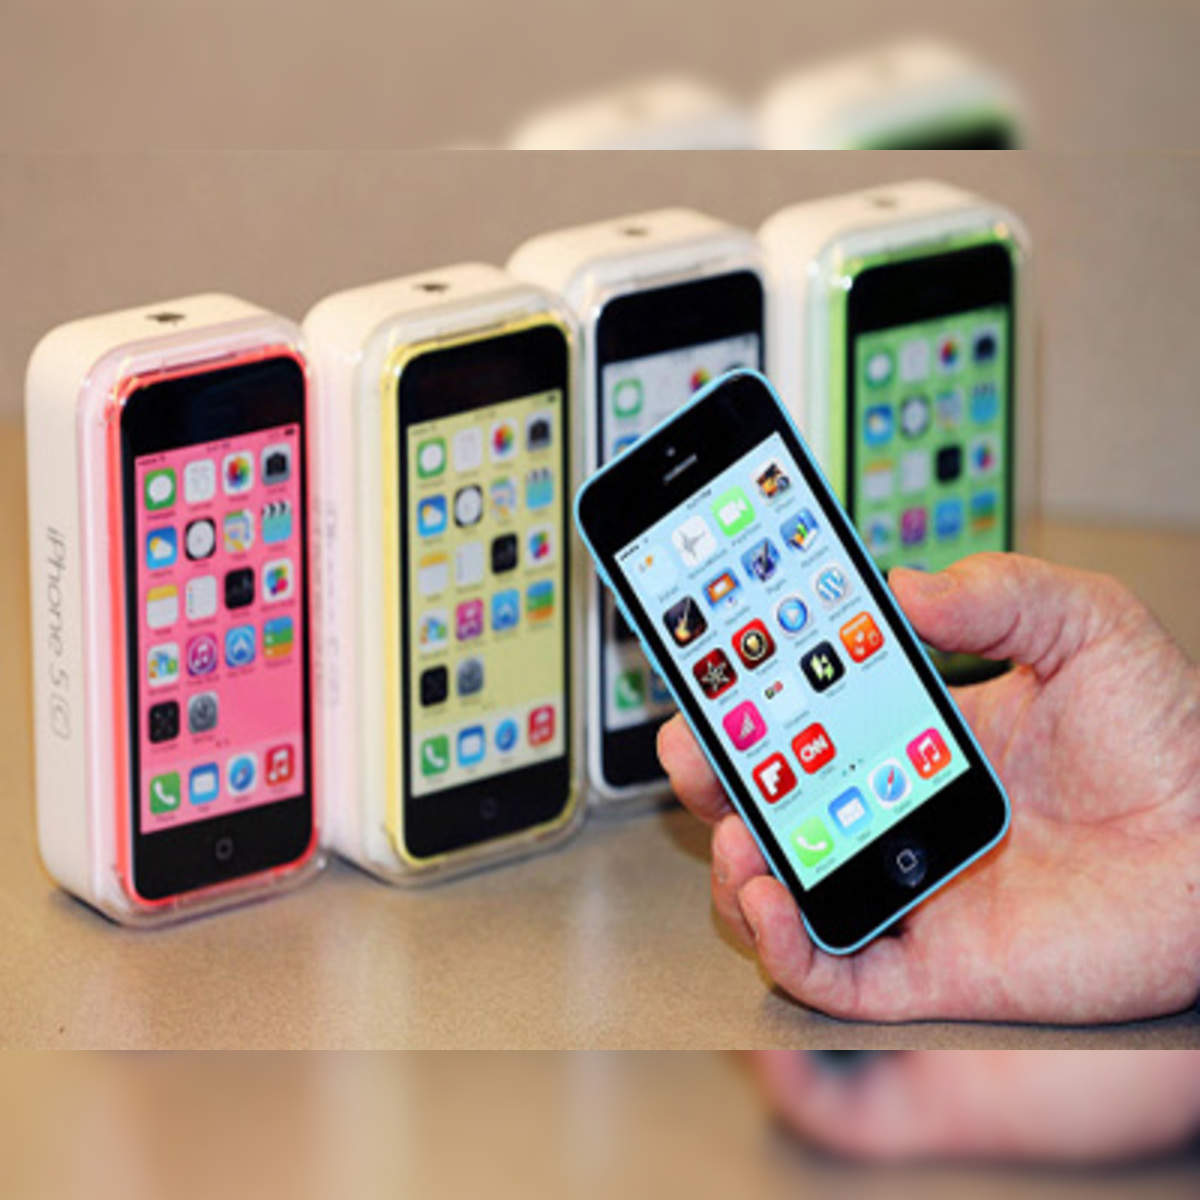 Samsung: Apple plans to launch cheaper 8GB version of iPhone 5C to